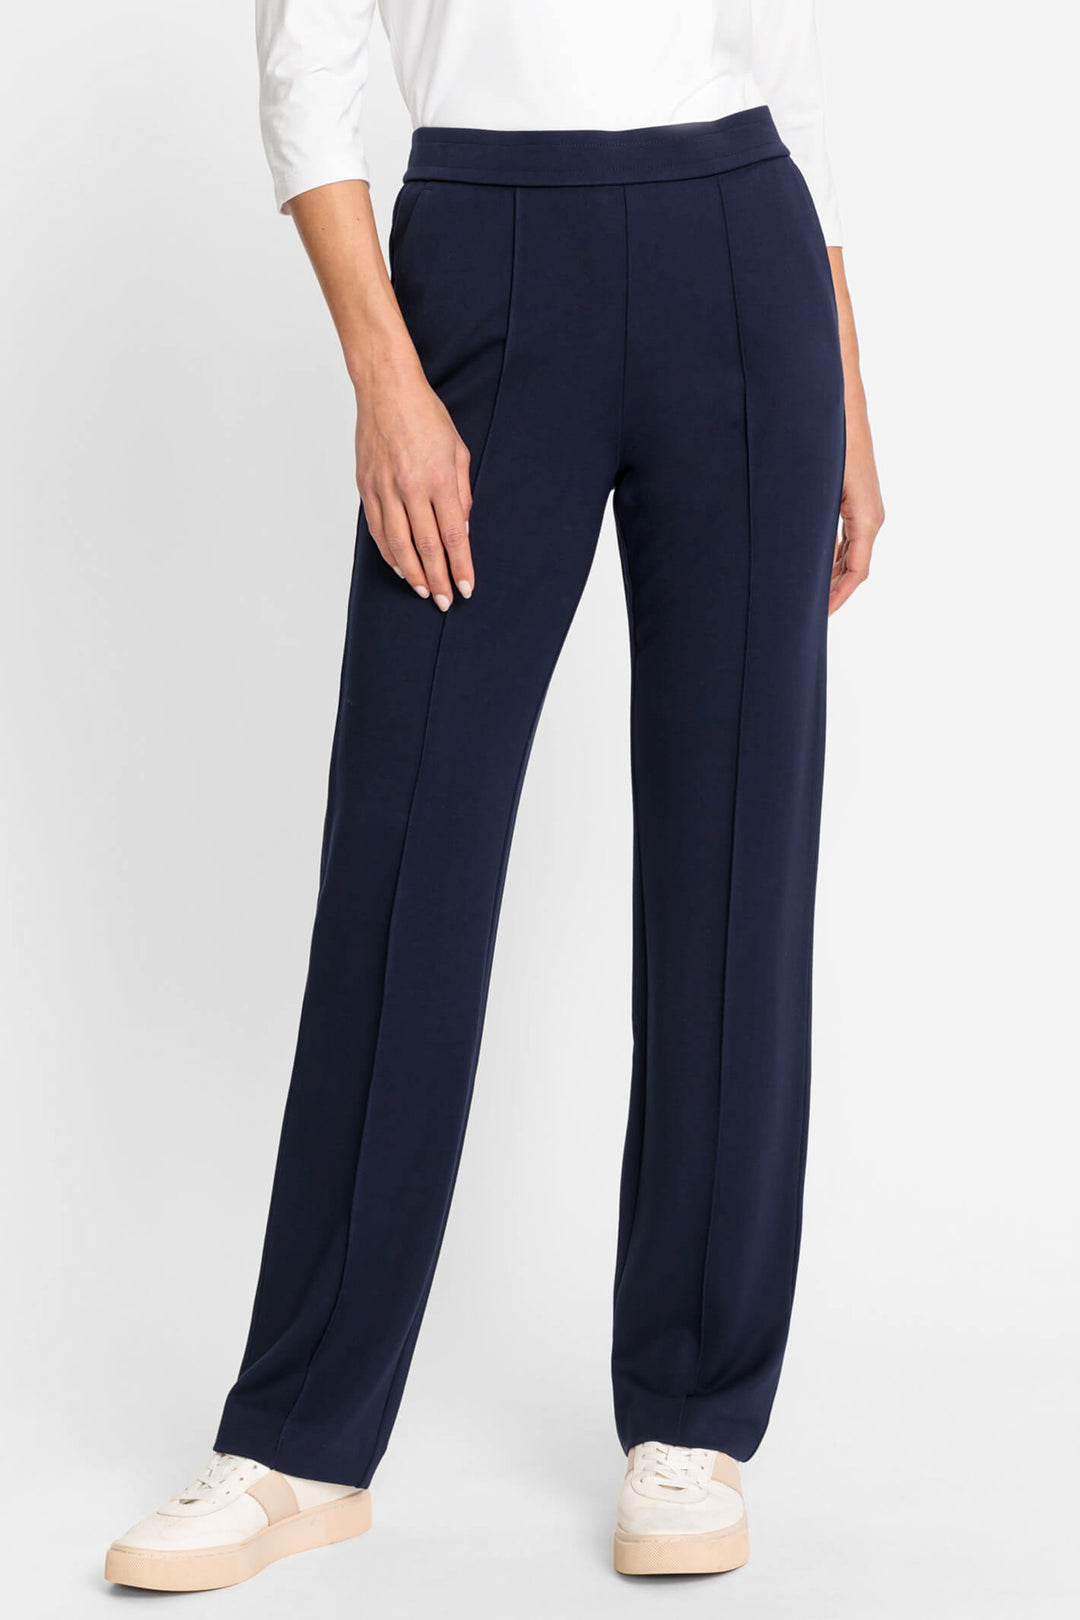 Olsen 14002097 Navy Ink Blue Micro-Flare Pull-On Trousers - Experience Boutique